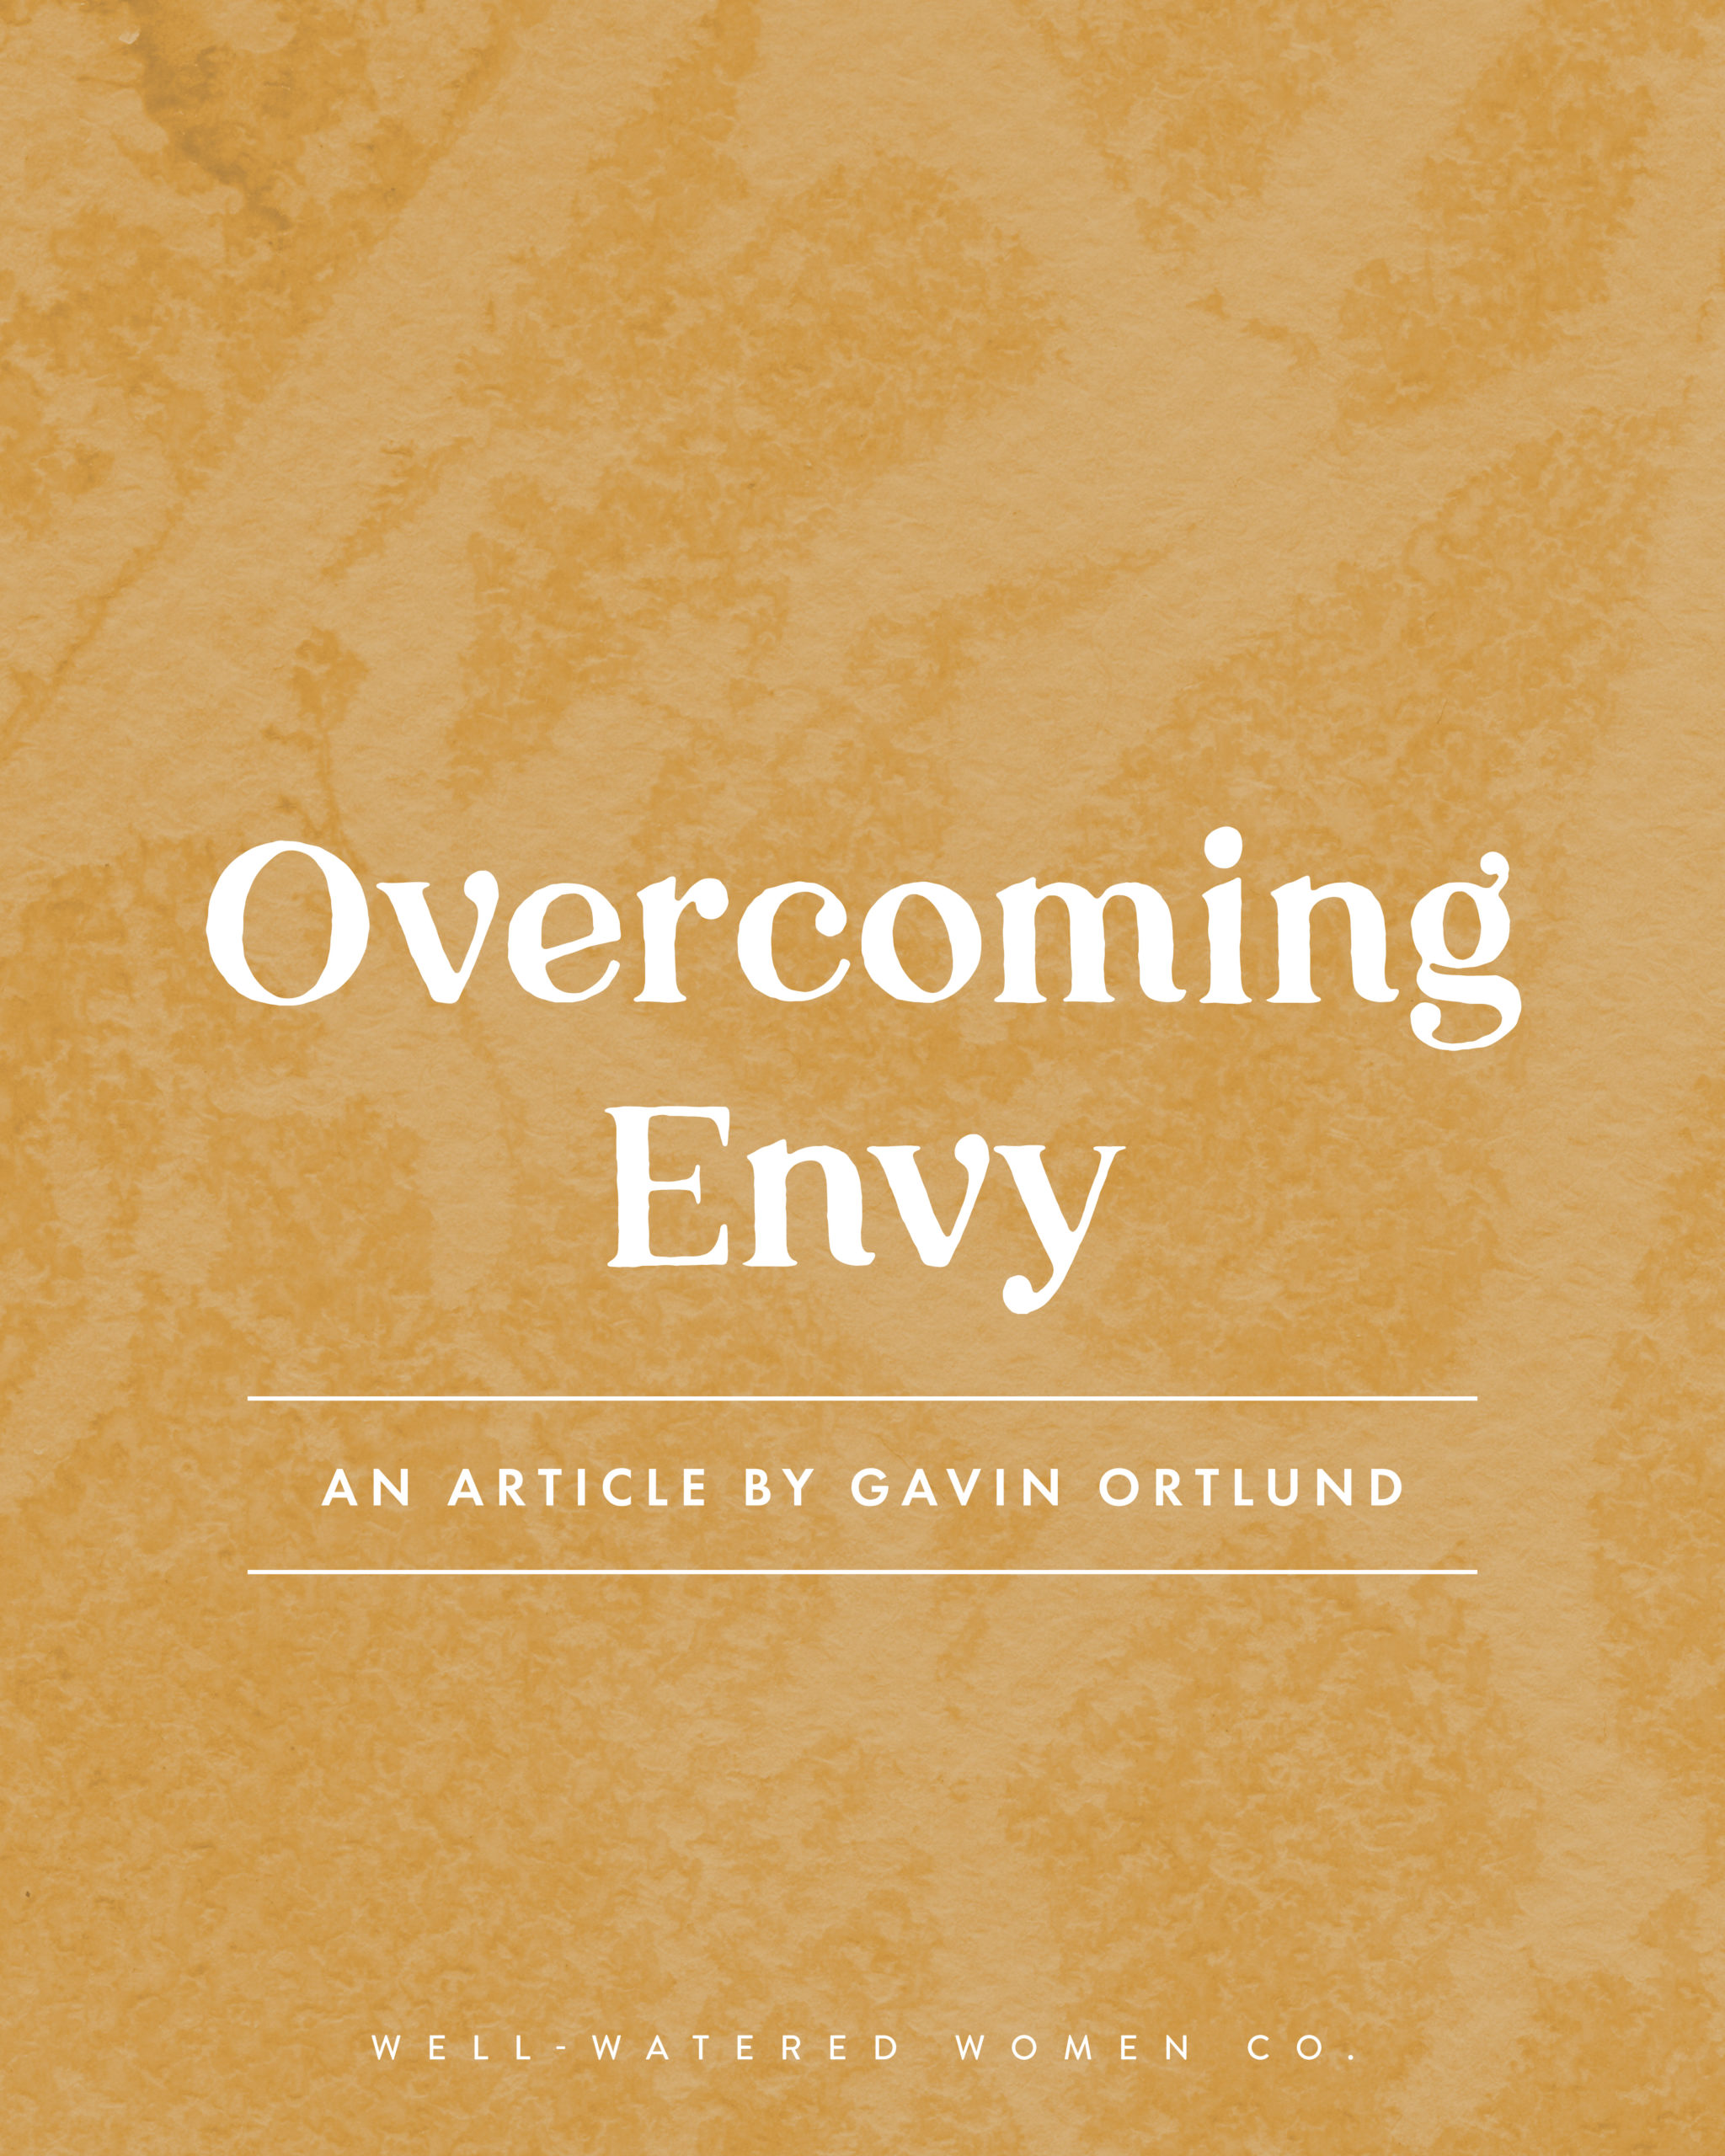 Overcoming Envy - an article from Well-Watered Women